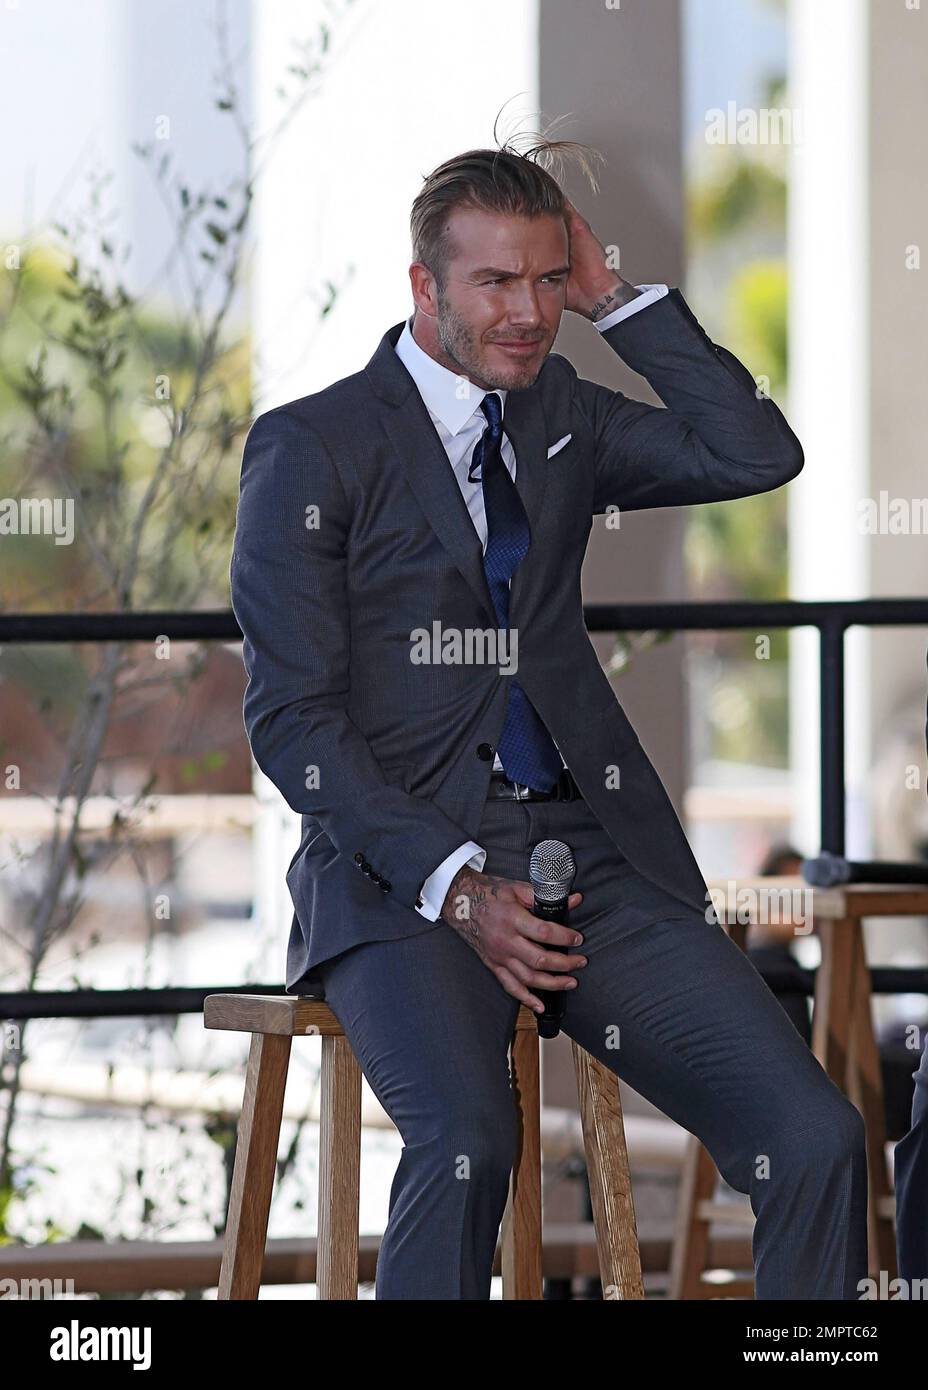 David Beckham along with Major League Soccer Commissioner Don Garber and Miami Mayor Gimenez announced today that he has exercised his option for an MLS expansion team and has chosen Miami the city to host his new club. Beckham's XIX Entertainment management agency, which includes business partner and long-time friend Simon Fuller, will partner up with MLS and local officials to finalize a deal for a world-class soccer stadium. 'From the beginning of my career in England to today in Miami, my journey has always been driven by my incredible passion for the game,' said Beckham. 'Miami is a vibra Stock Photo